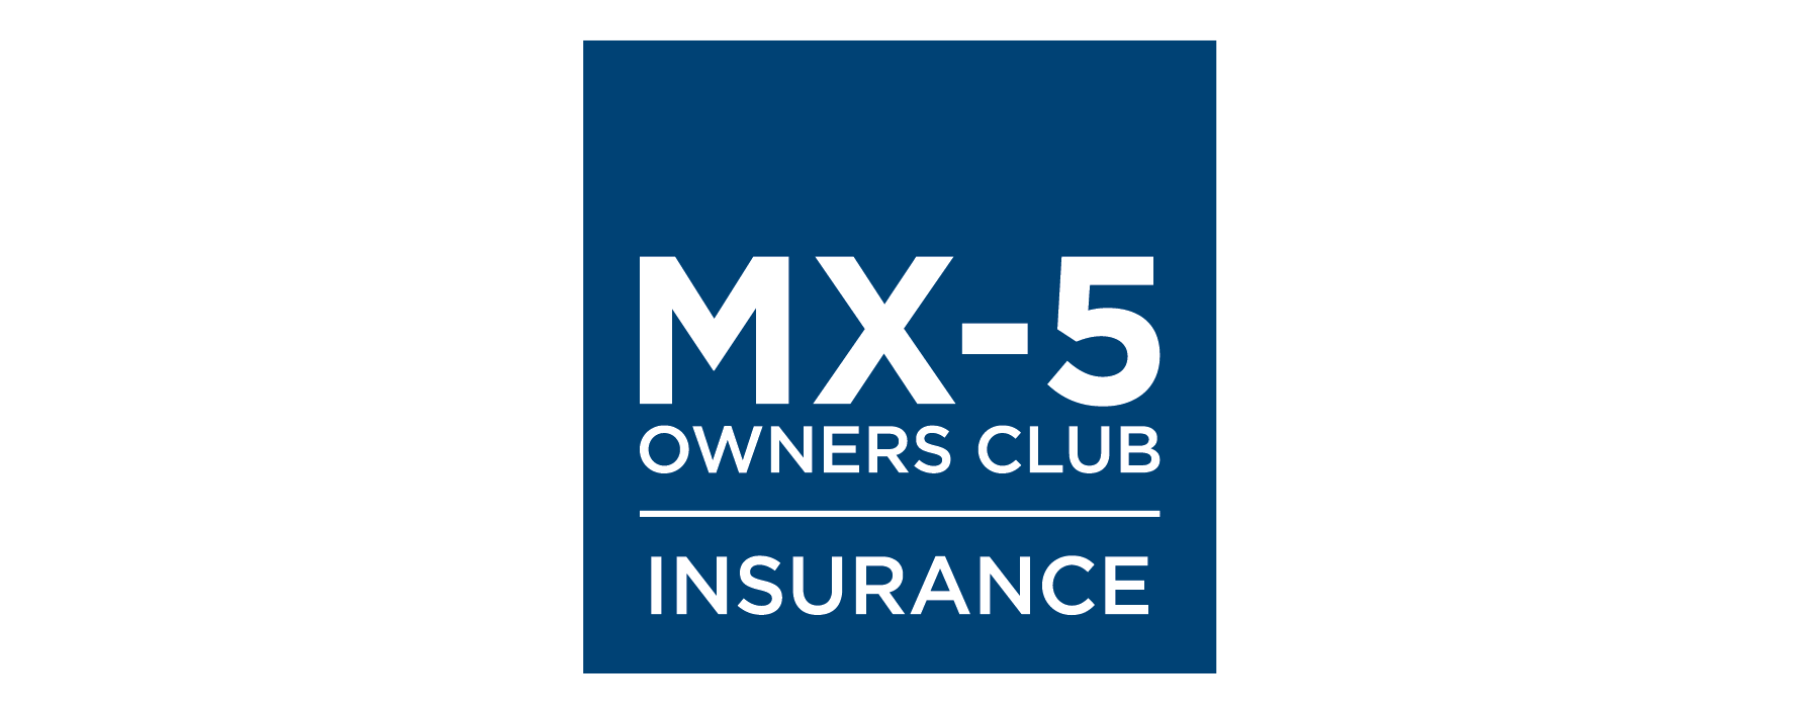 MX-5 Owners Club Insurance launches